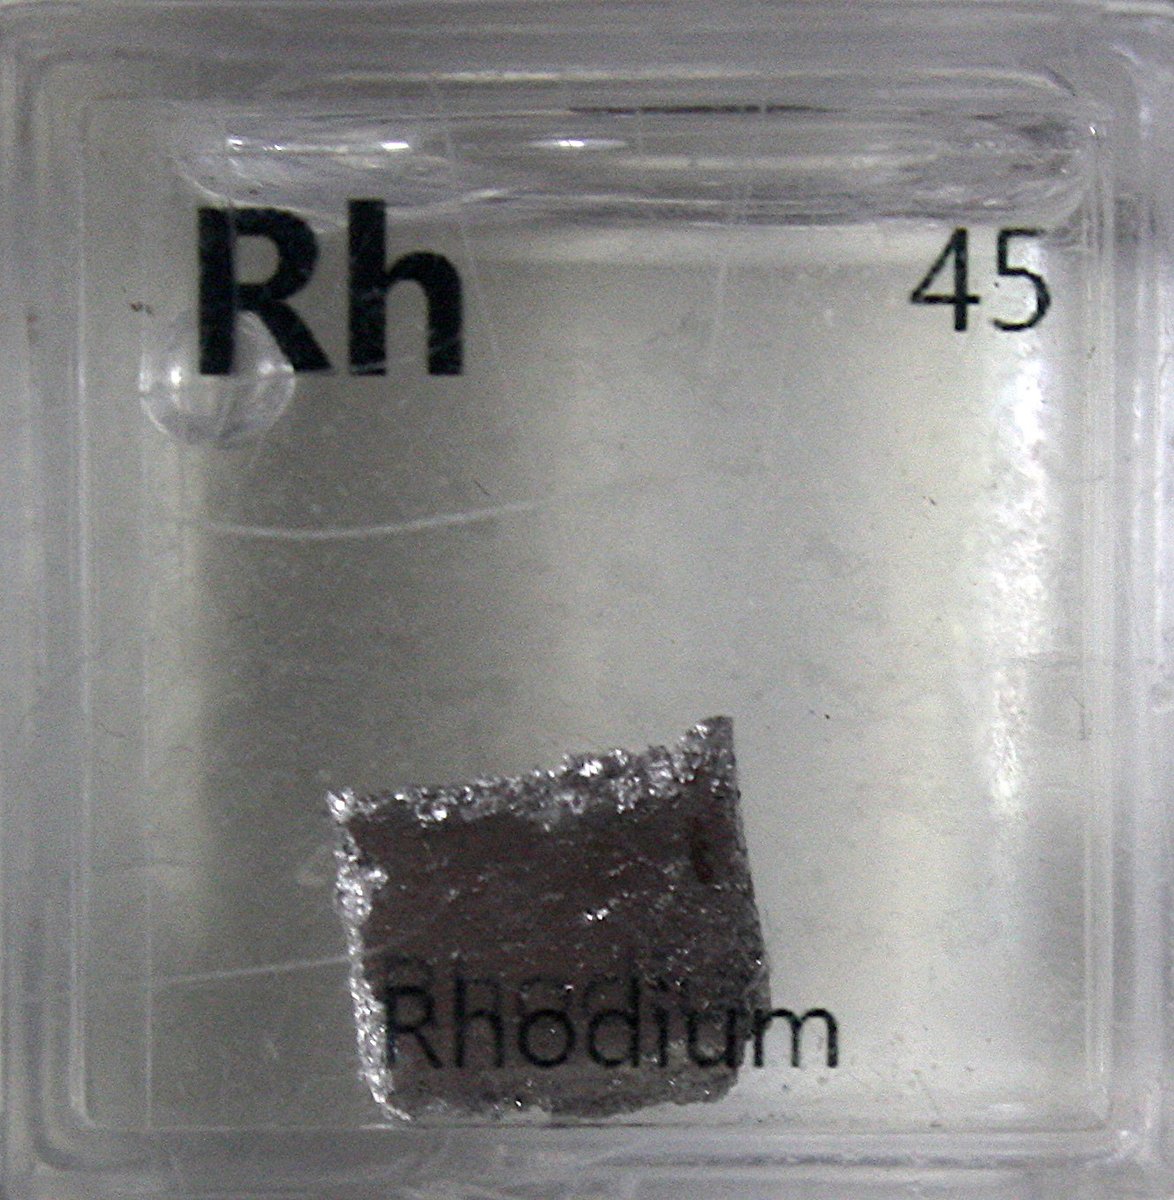 Rhodium  #elementphotos. Dark compound is rhodium chloride (RhCl3.xH2O). Currently the most expensive non-radioactive compound. Donations welcome.